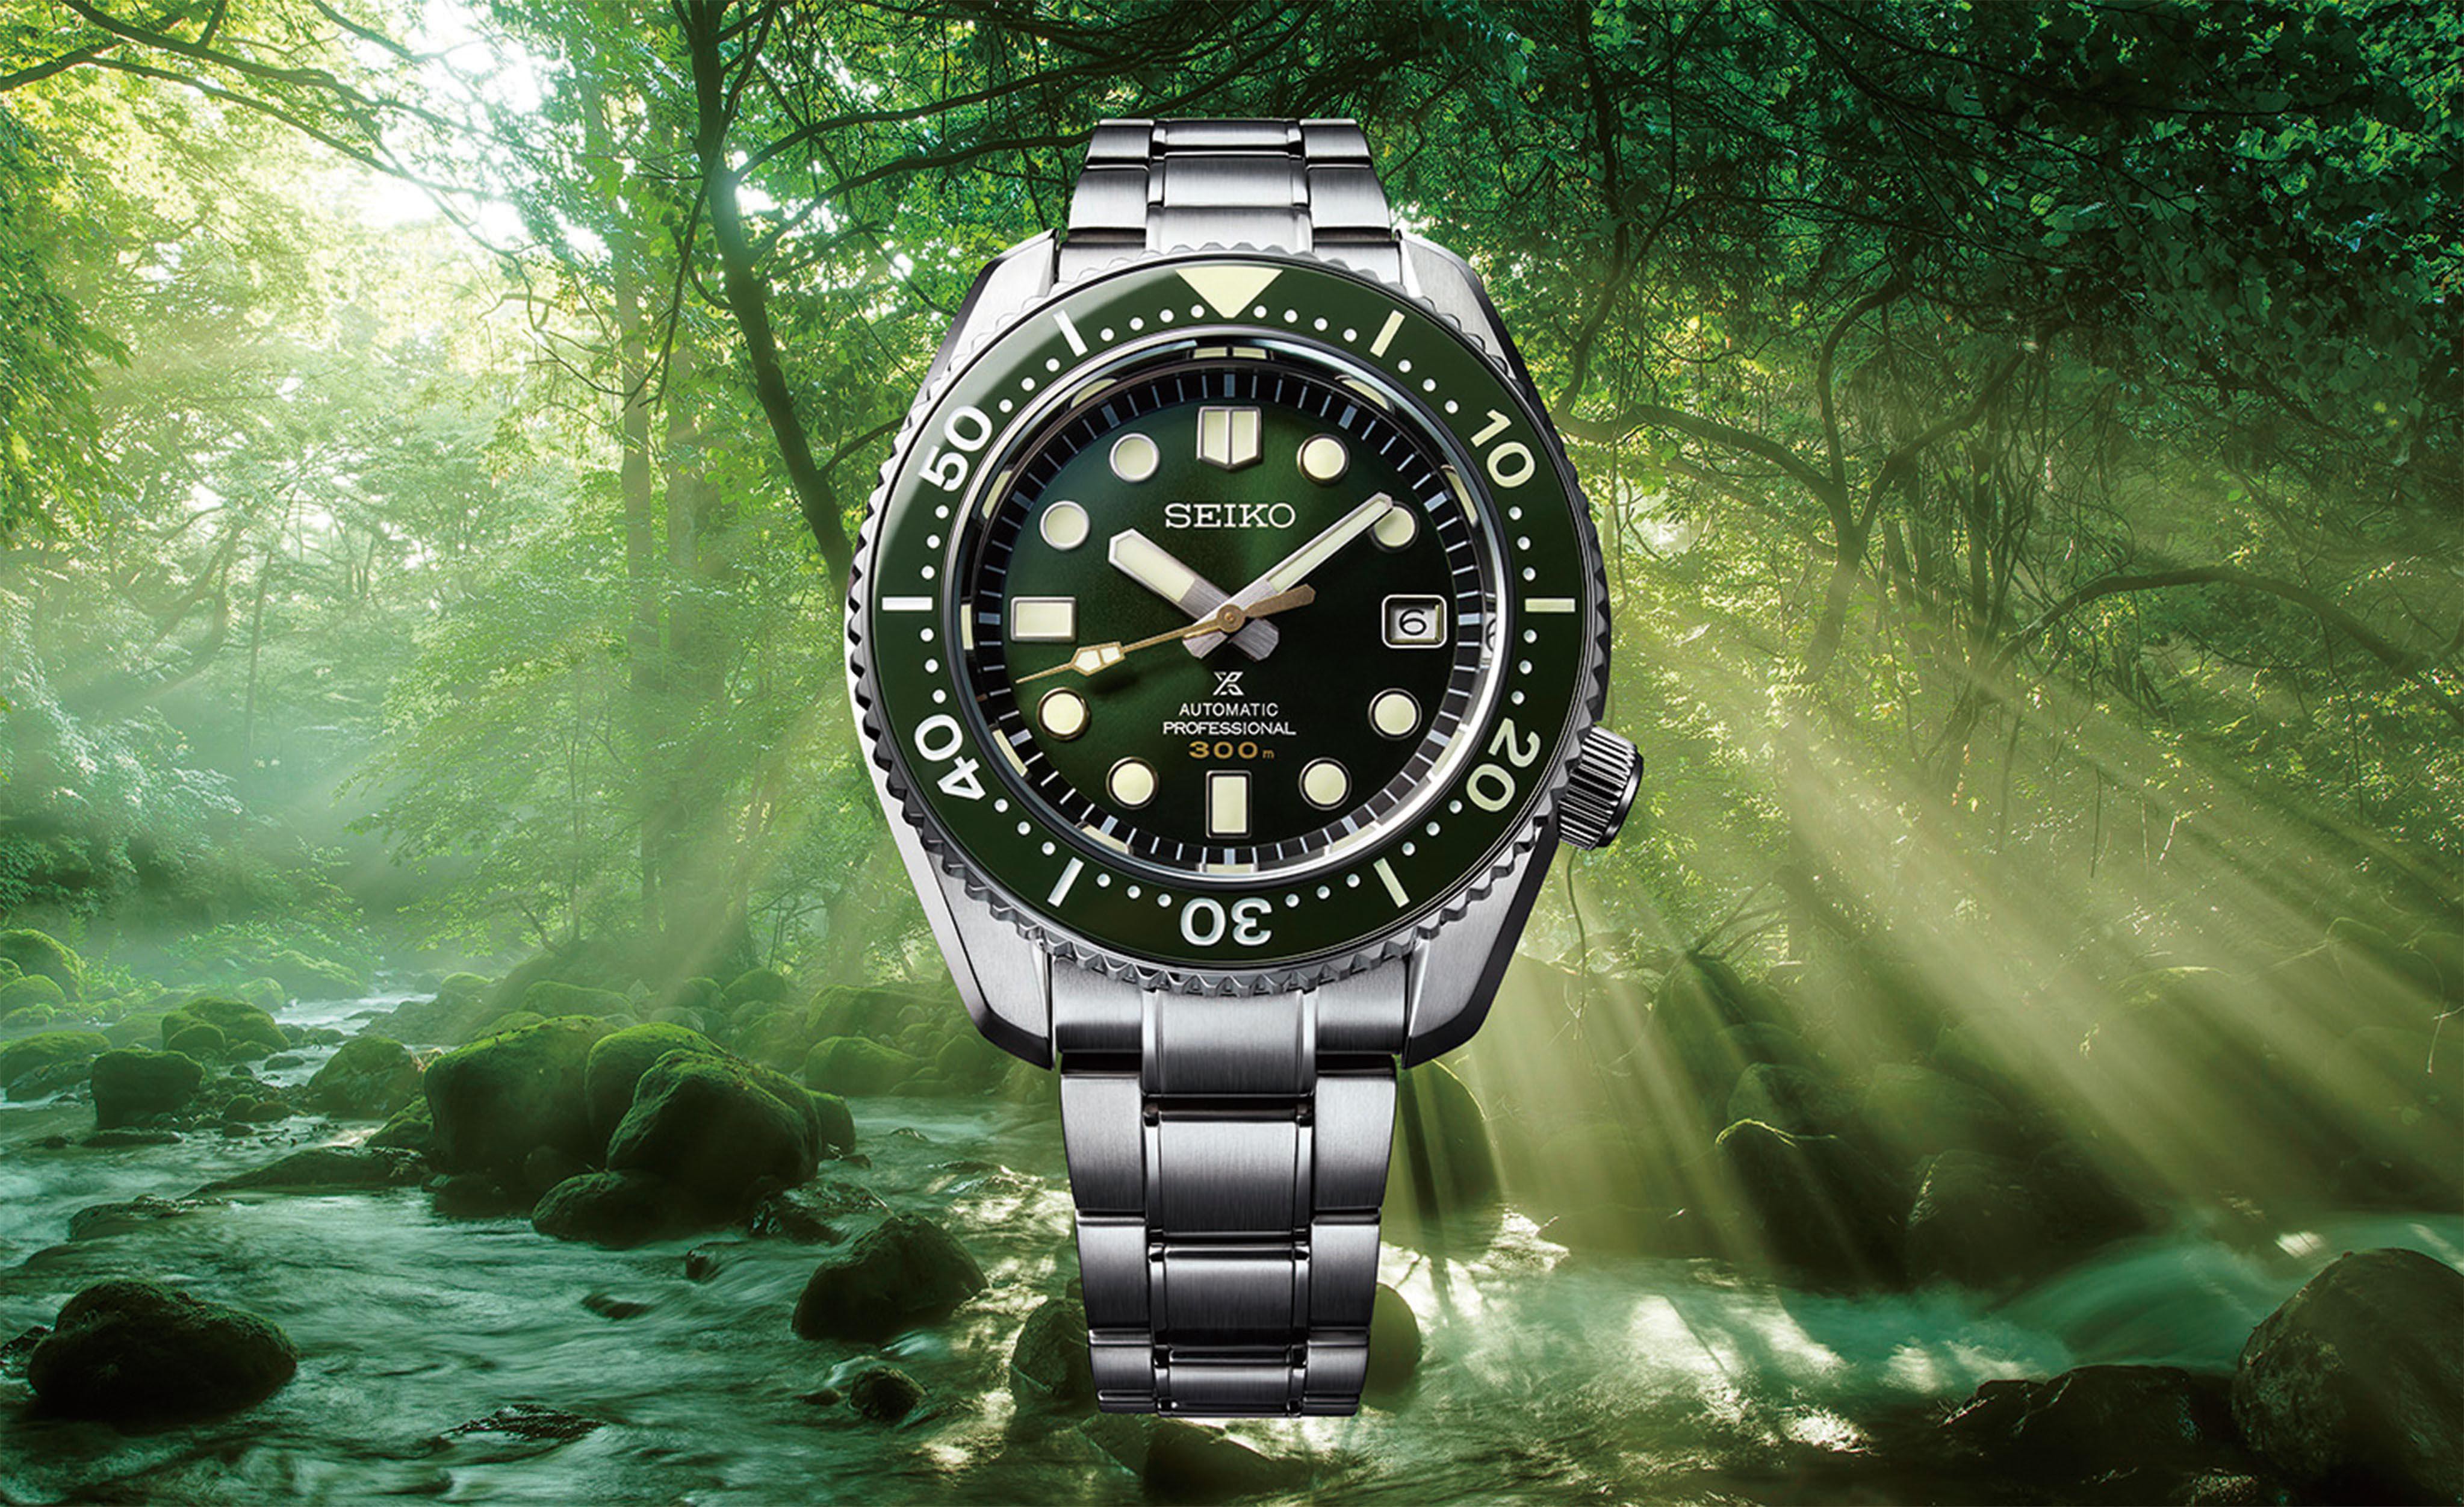 Joseph Edwards Watches Seiko 140th Anniversary Limited Edition The Prospex  SPB207 Automatic Is A Re-imagination Of An Iconic Seiko Diver That Captures  The Rich Ocean's Deep Green Scenery Surrounding Iriomote |  